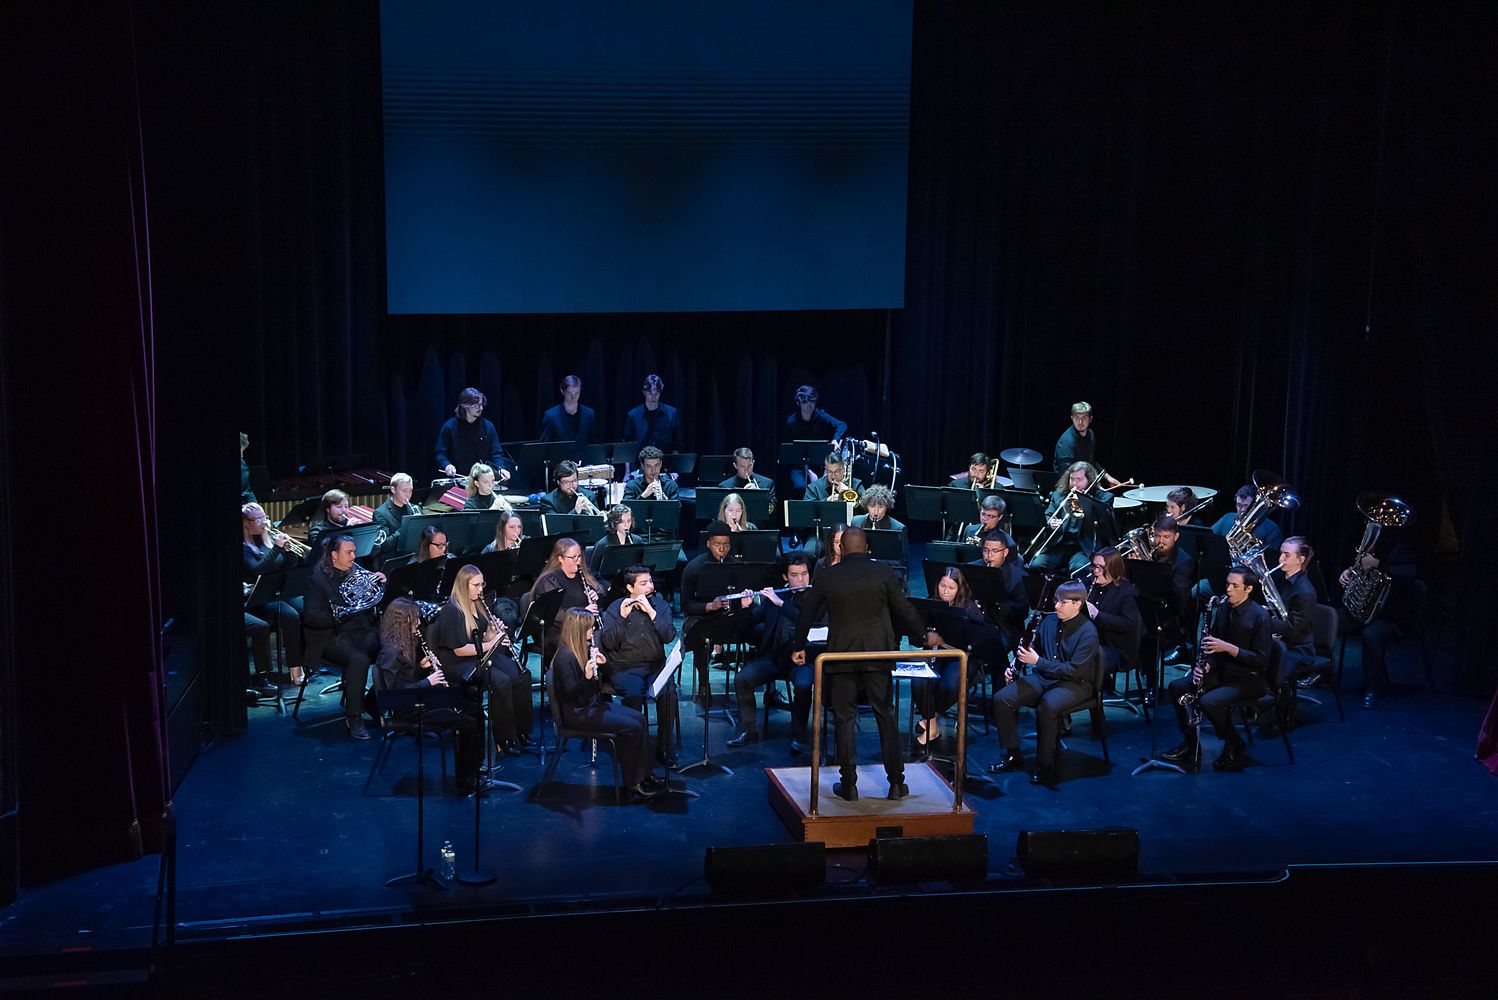 The symphonic band performing on stage